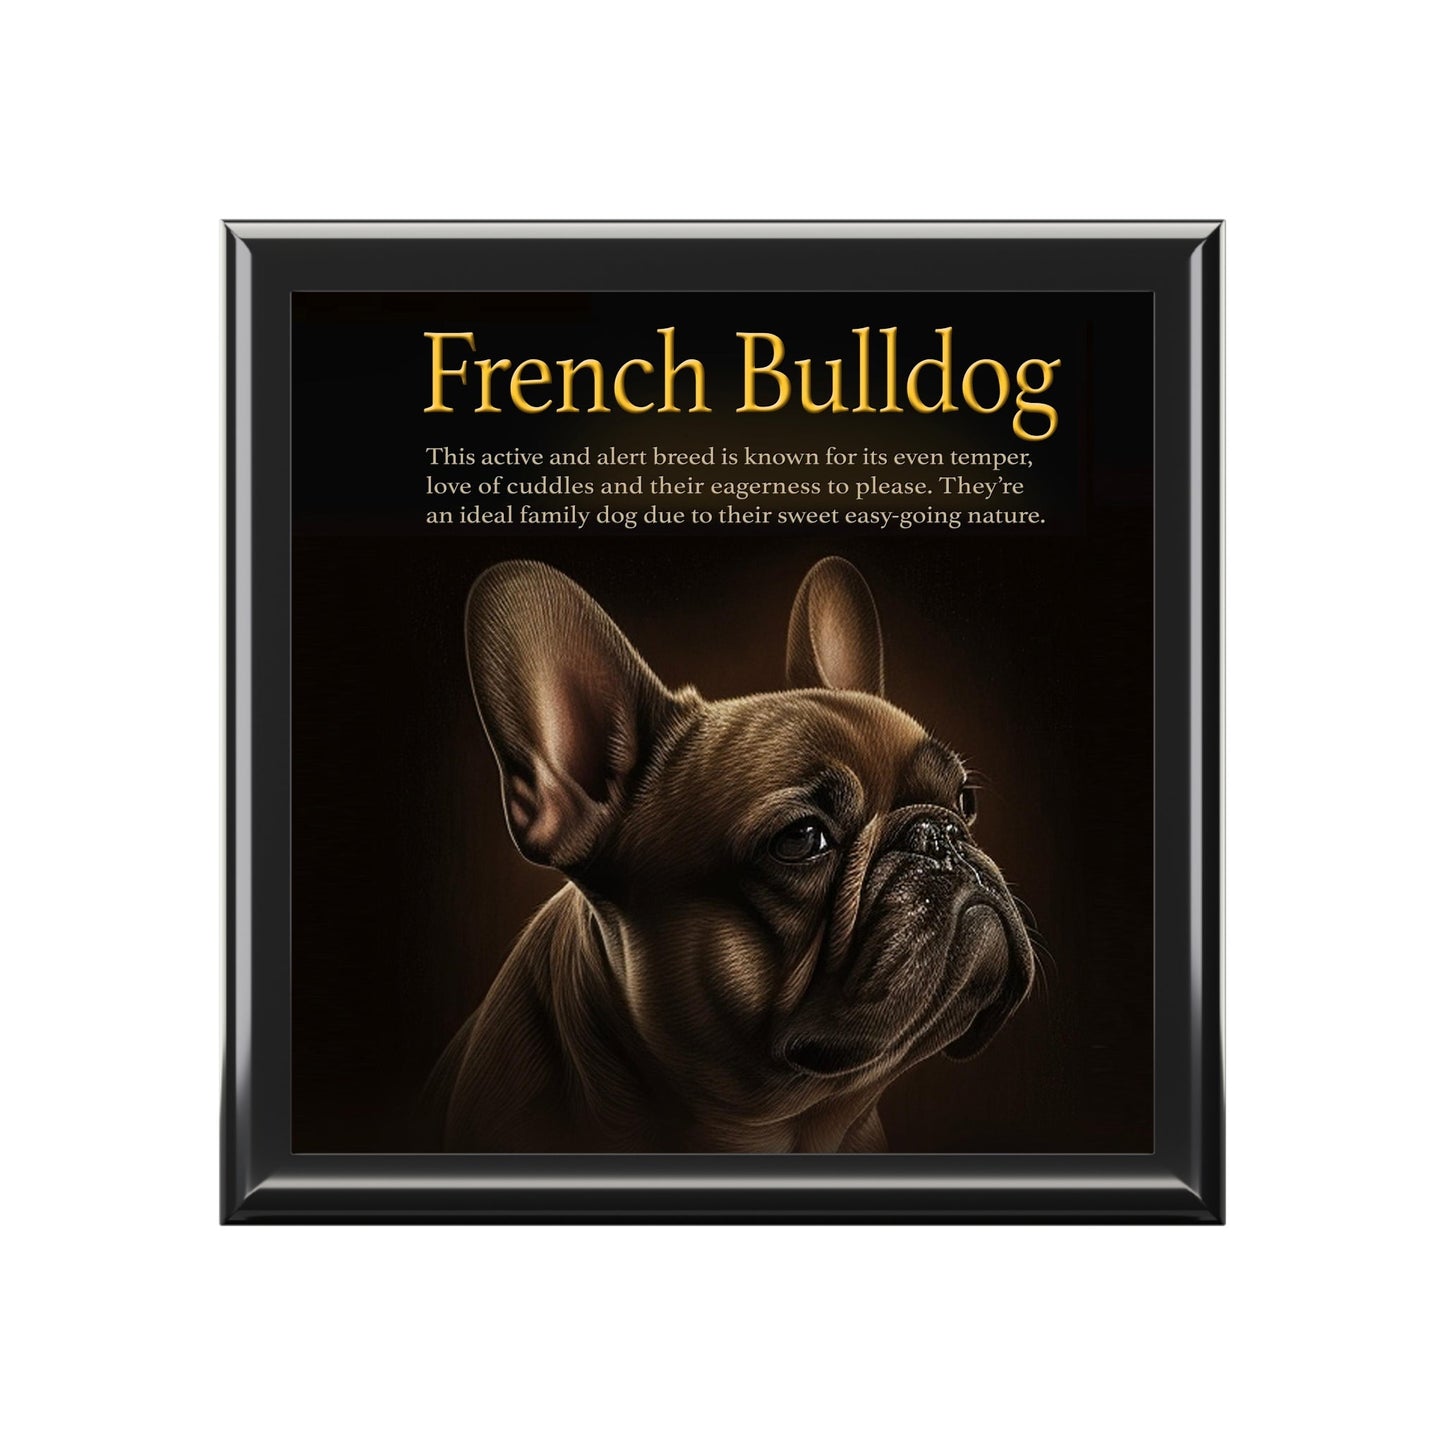 The Fabulous French Bulldog Keepsake Jewelry Box with Ceramic Tile Cover